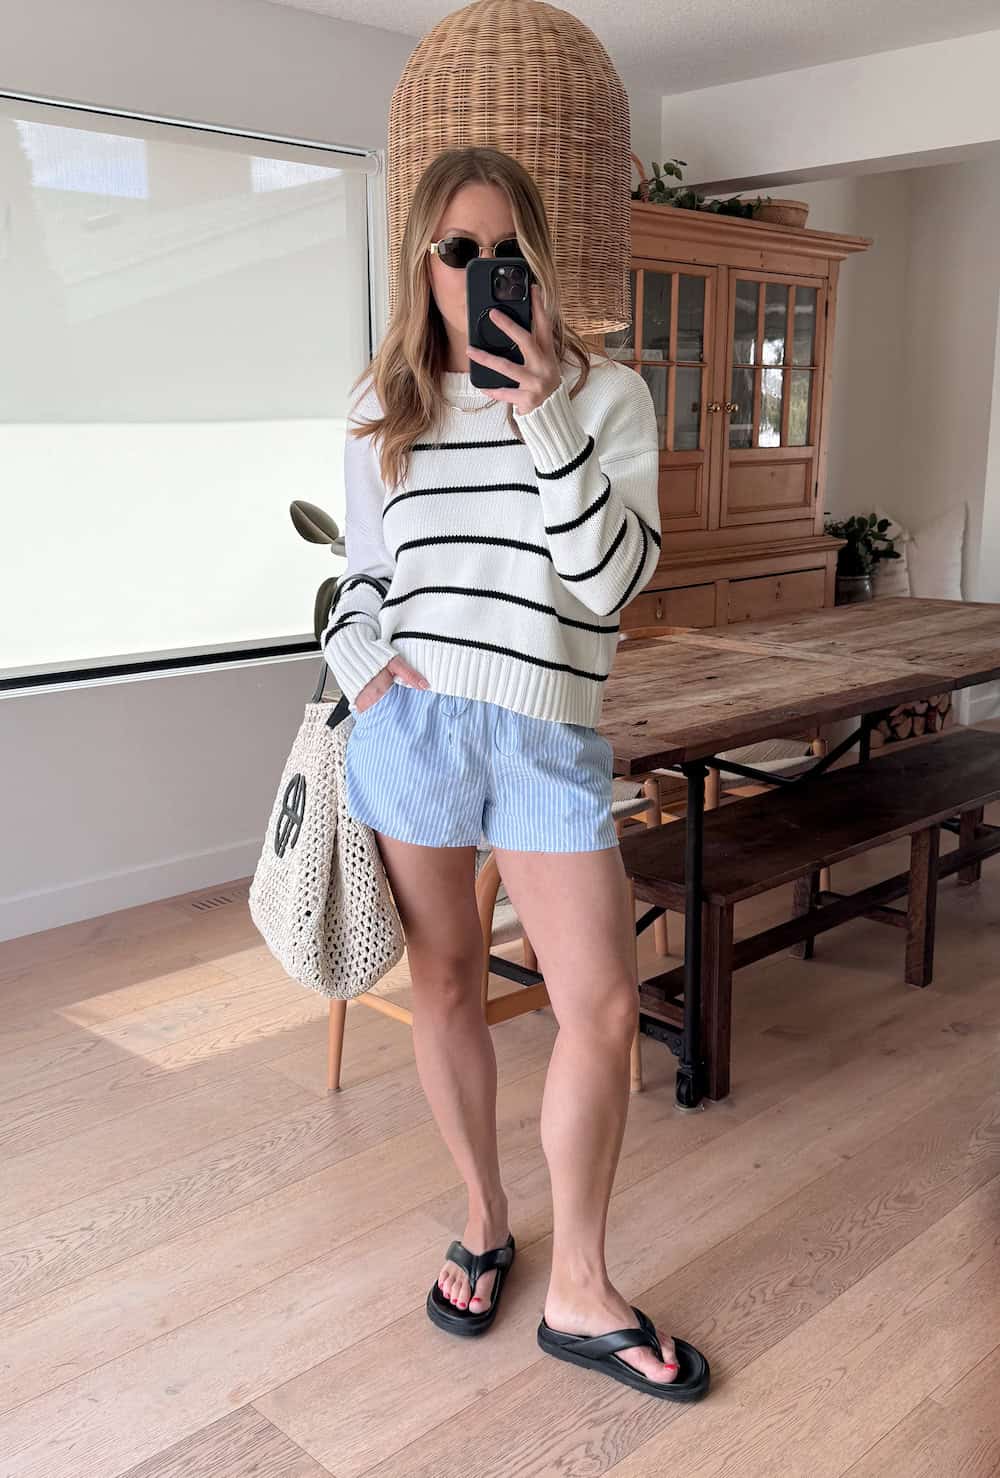 Christal wearing white and blue striped shorts with a white and black striped sweater.